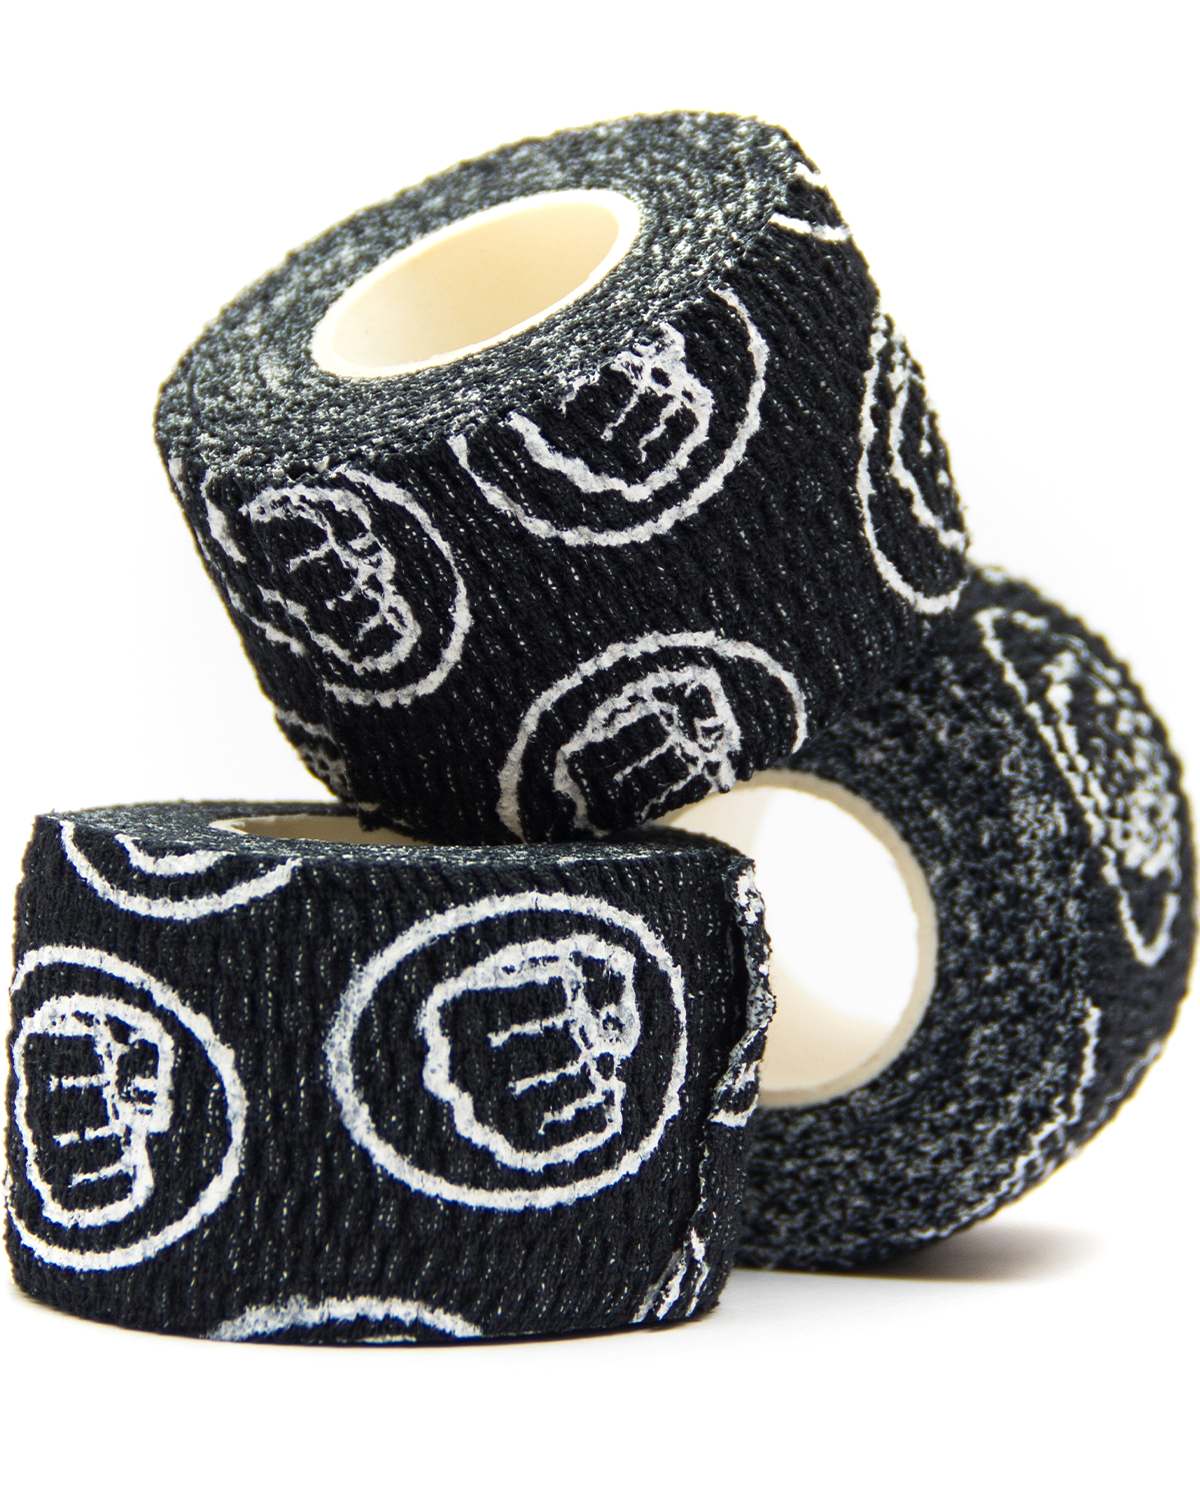  Bear Grips Weightlifting Thumb Tape - Home Gym Equipment Hook  Grip Tape for Wrist, and Finger Protection - Self Adhesive Athletic Tape  for Weightlifting, Powerlifting, Cross Trainers : Health & Household